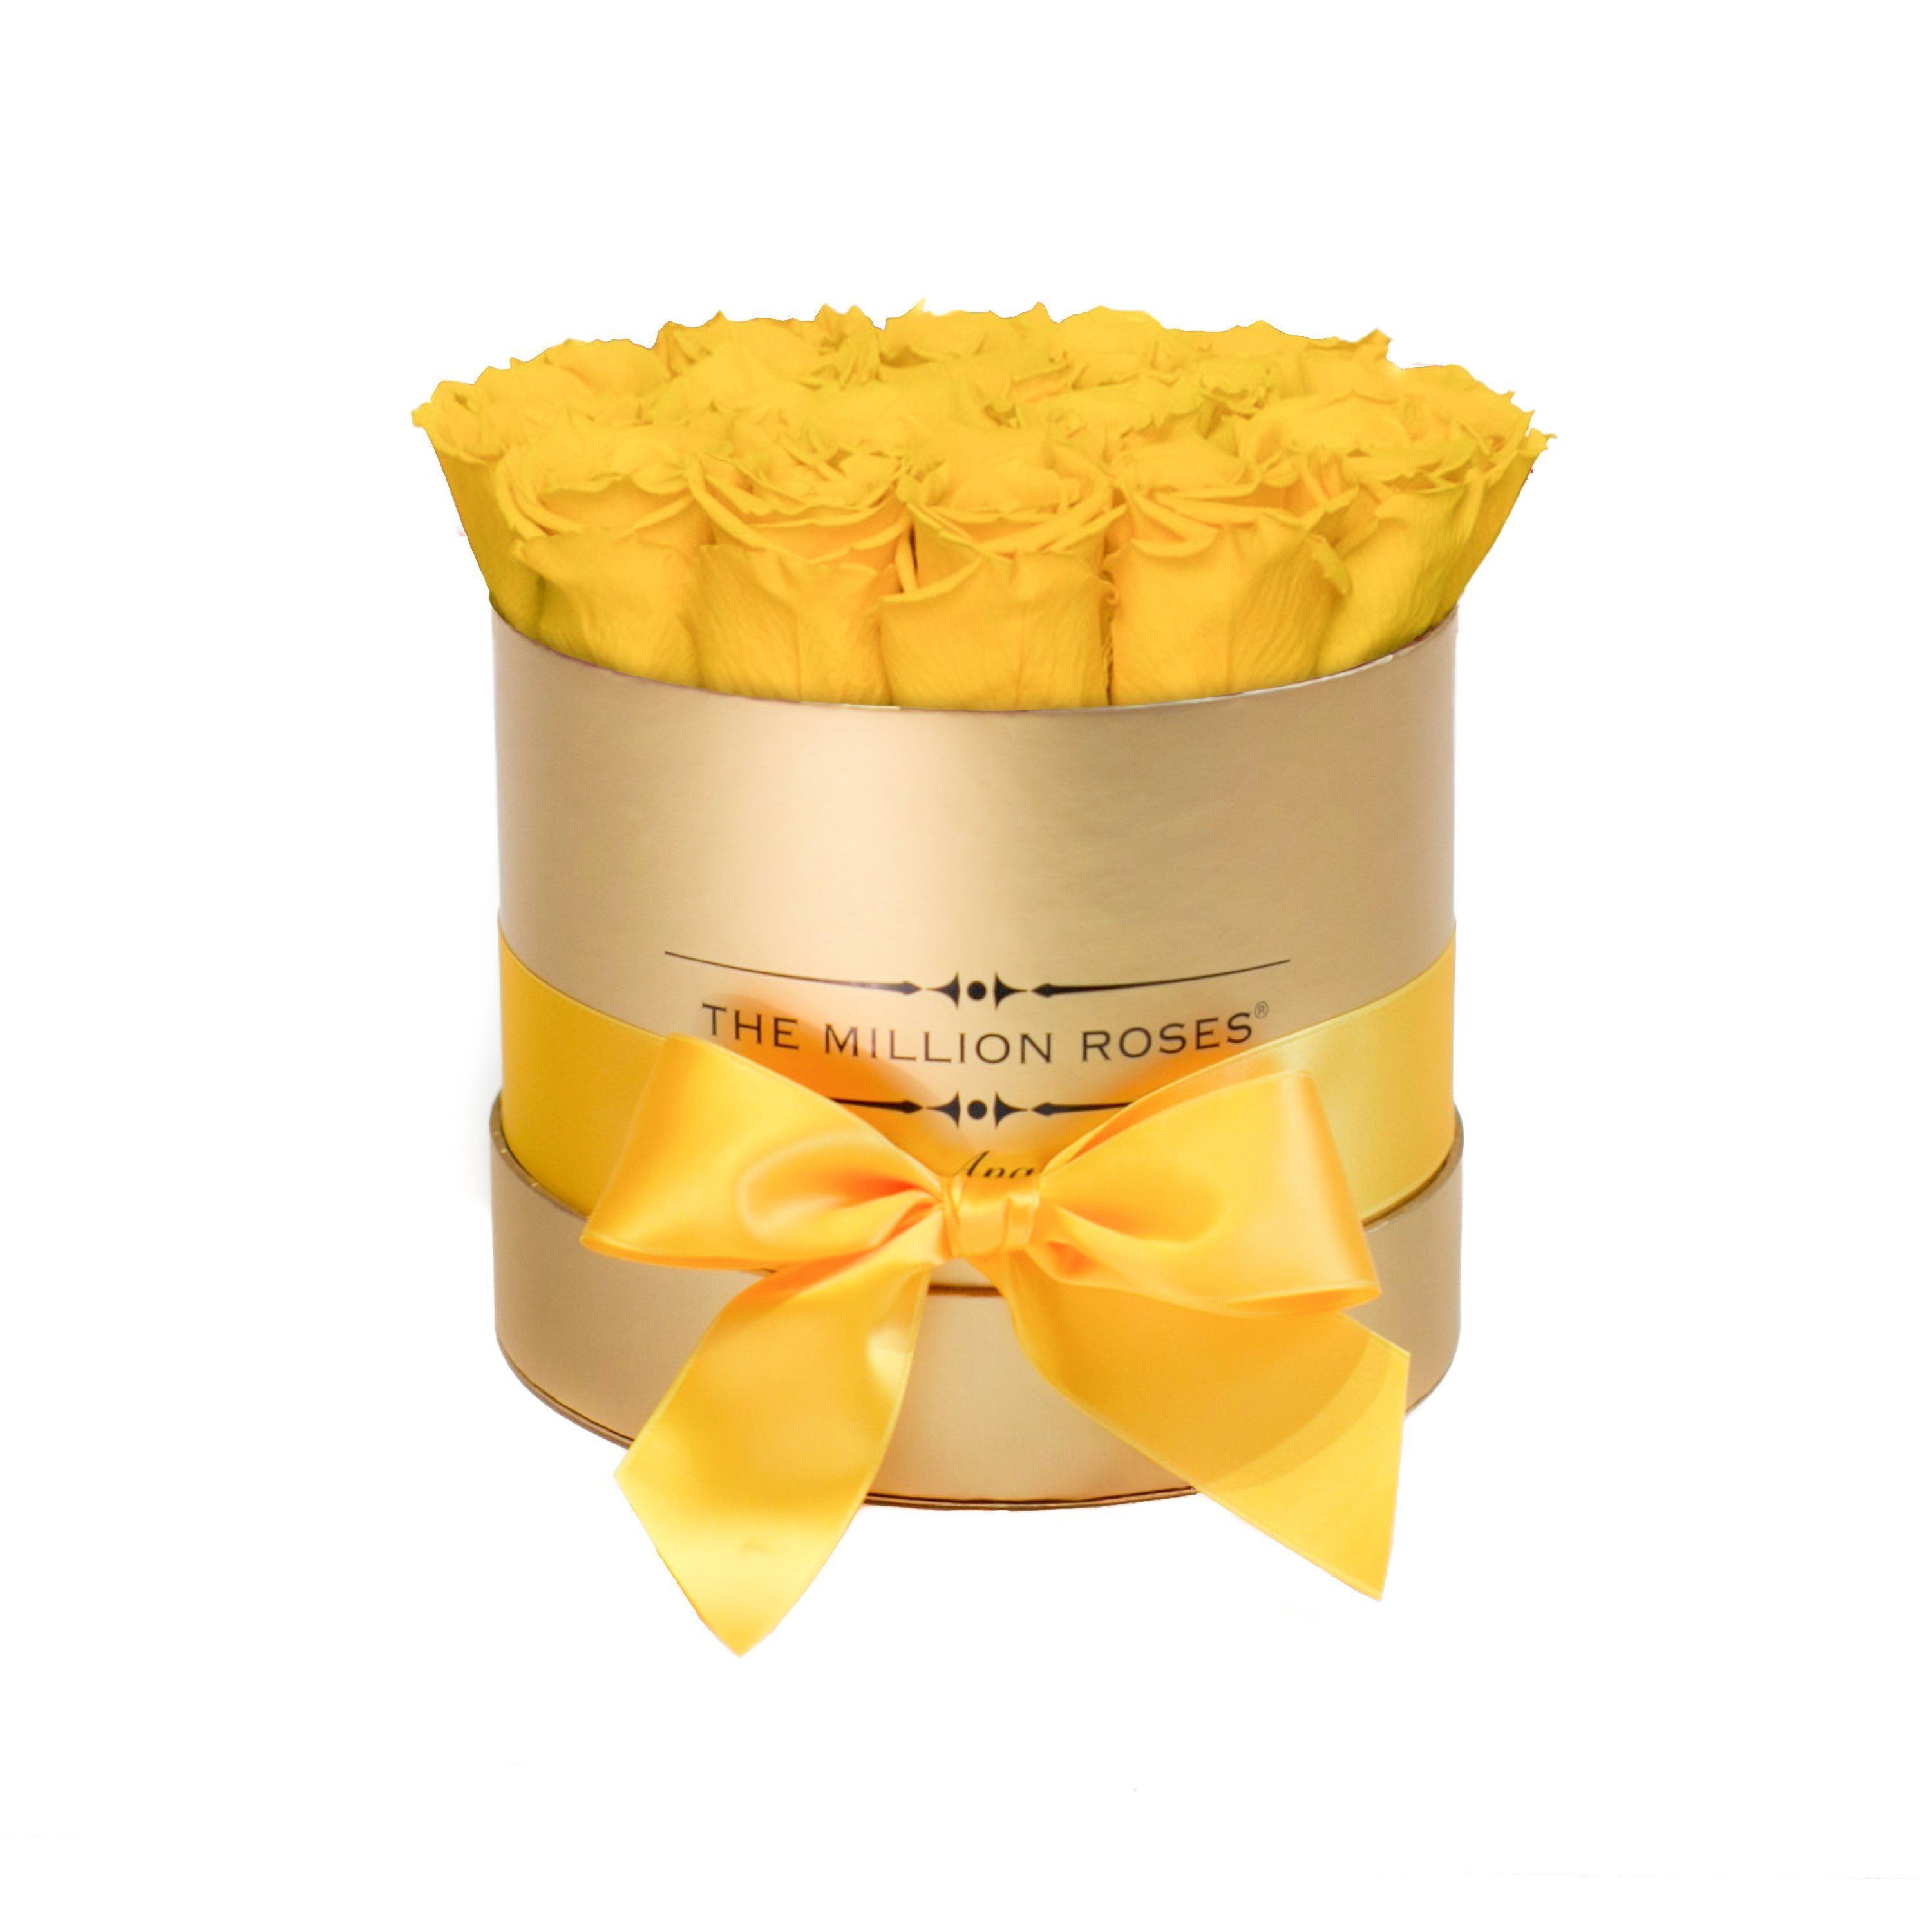 classic round box - gold - yellow roses yellow eternity roses - the million roses